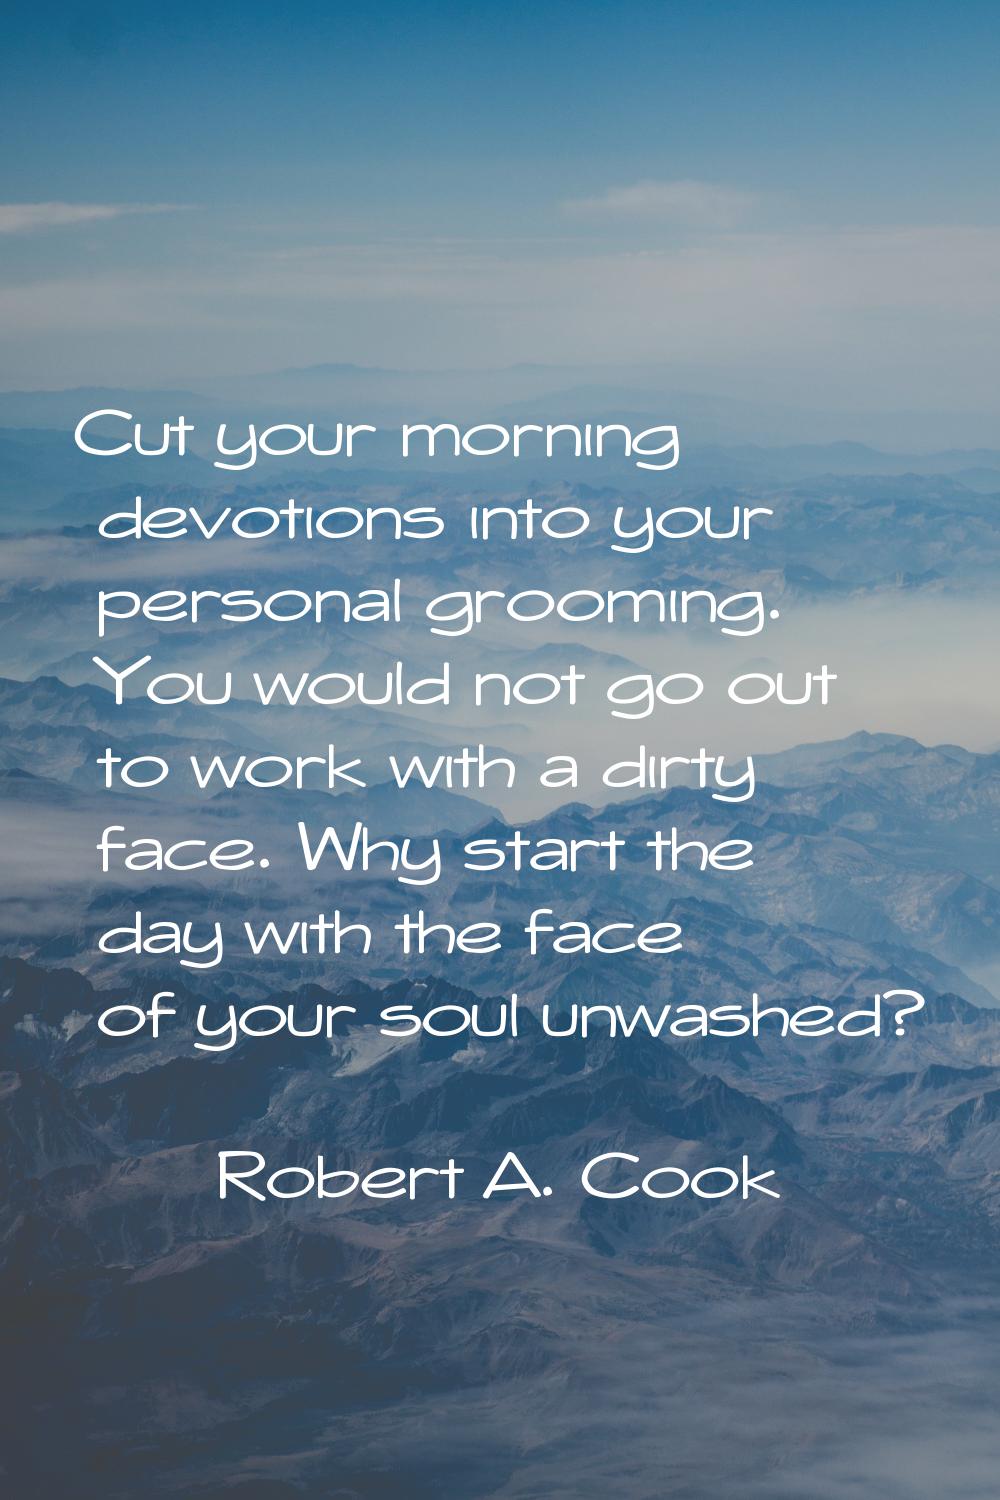 Cut your morning devotions into your personal grooming. You would not go out to work with a dirty f